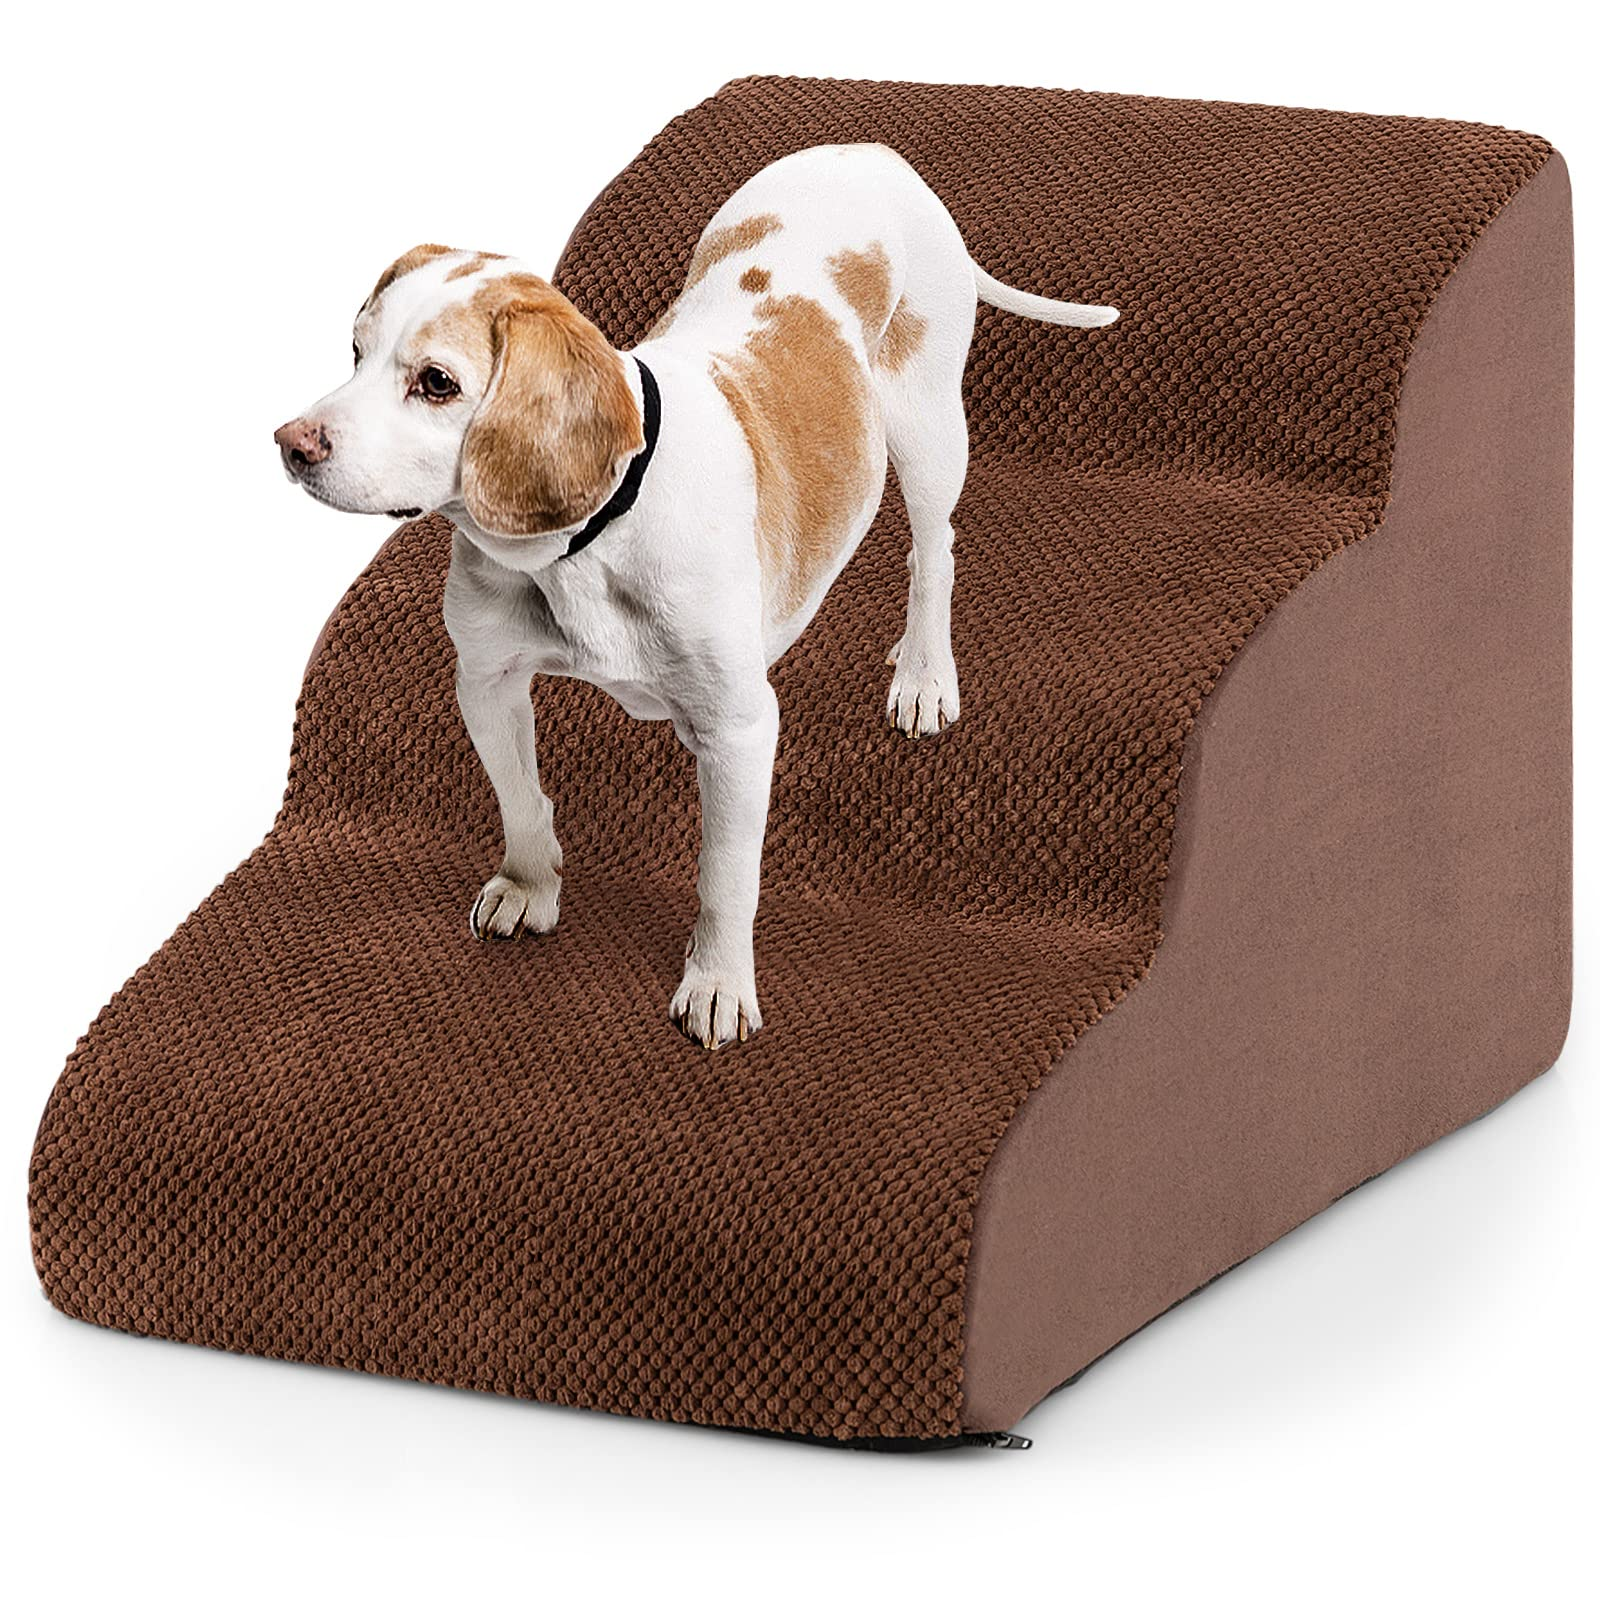 Giantex Dog Ramp Stairs for Bed